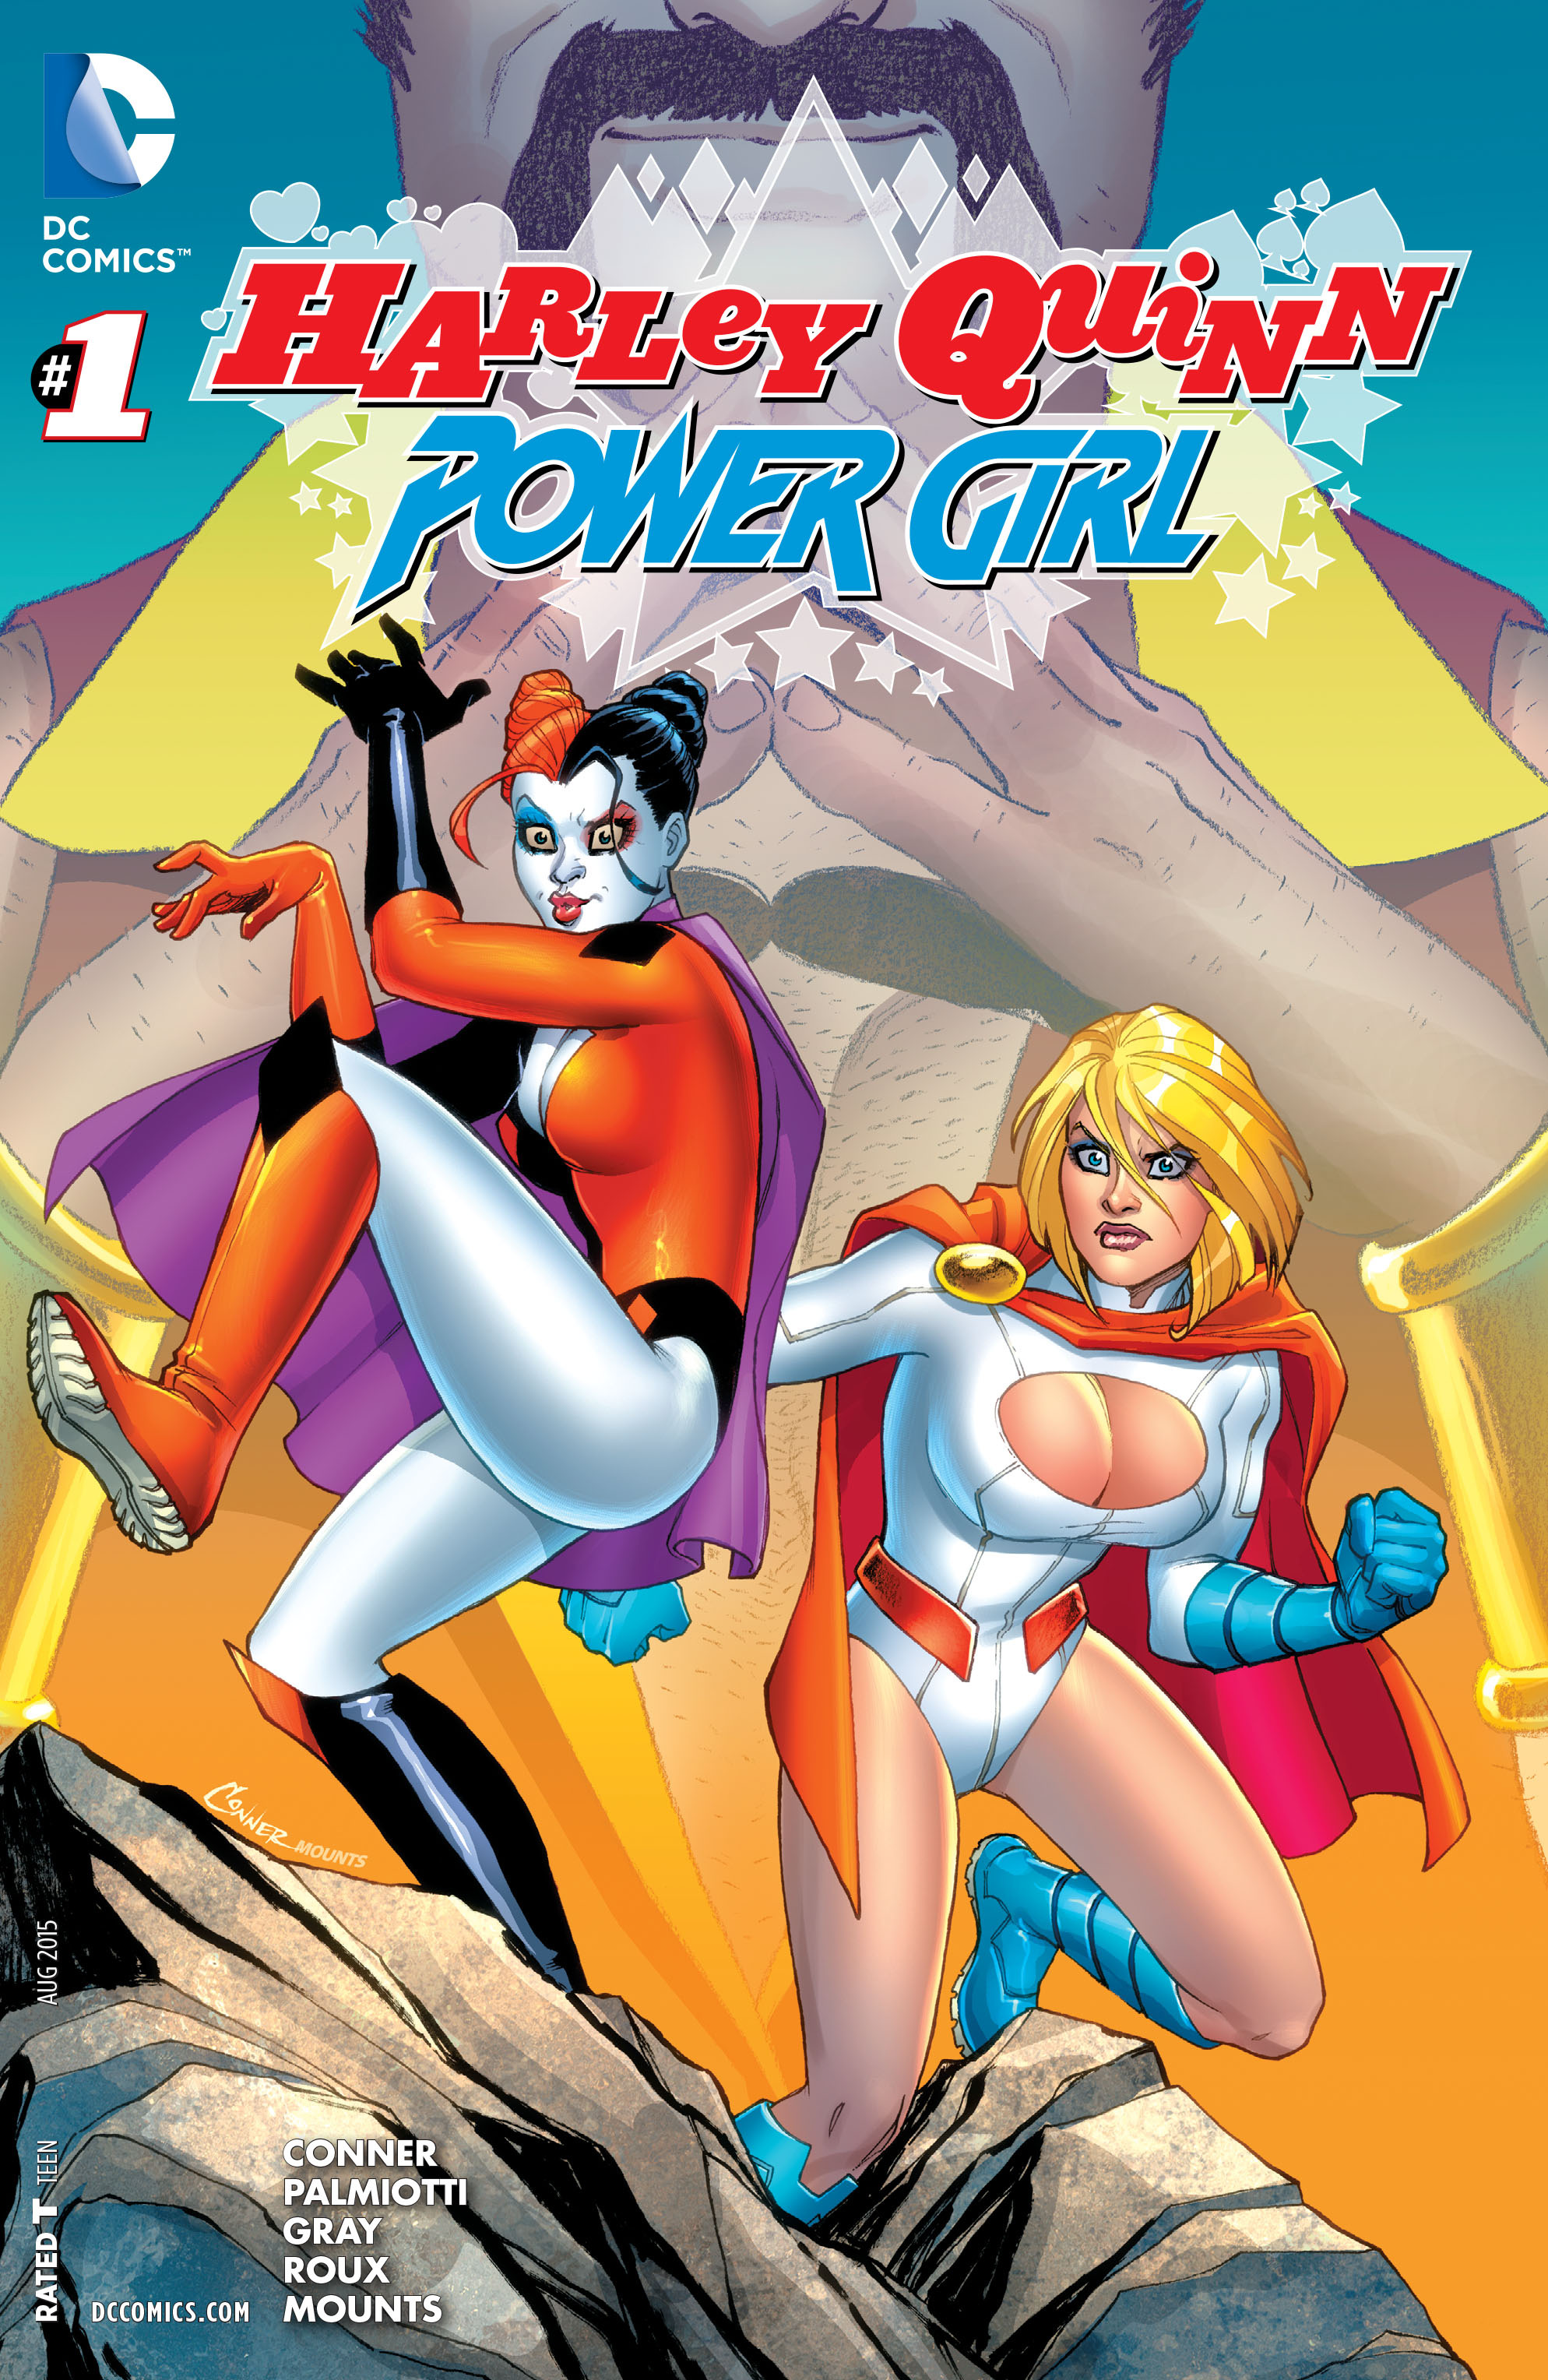 Harley Quinn And Power Girl Issue 1 | Read Harley Quinn And Power Girl  Issue 1 comic online in high quality. Read Full Comic online for free -  Read comics online in